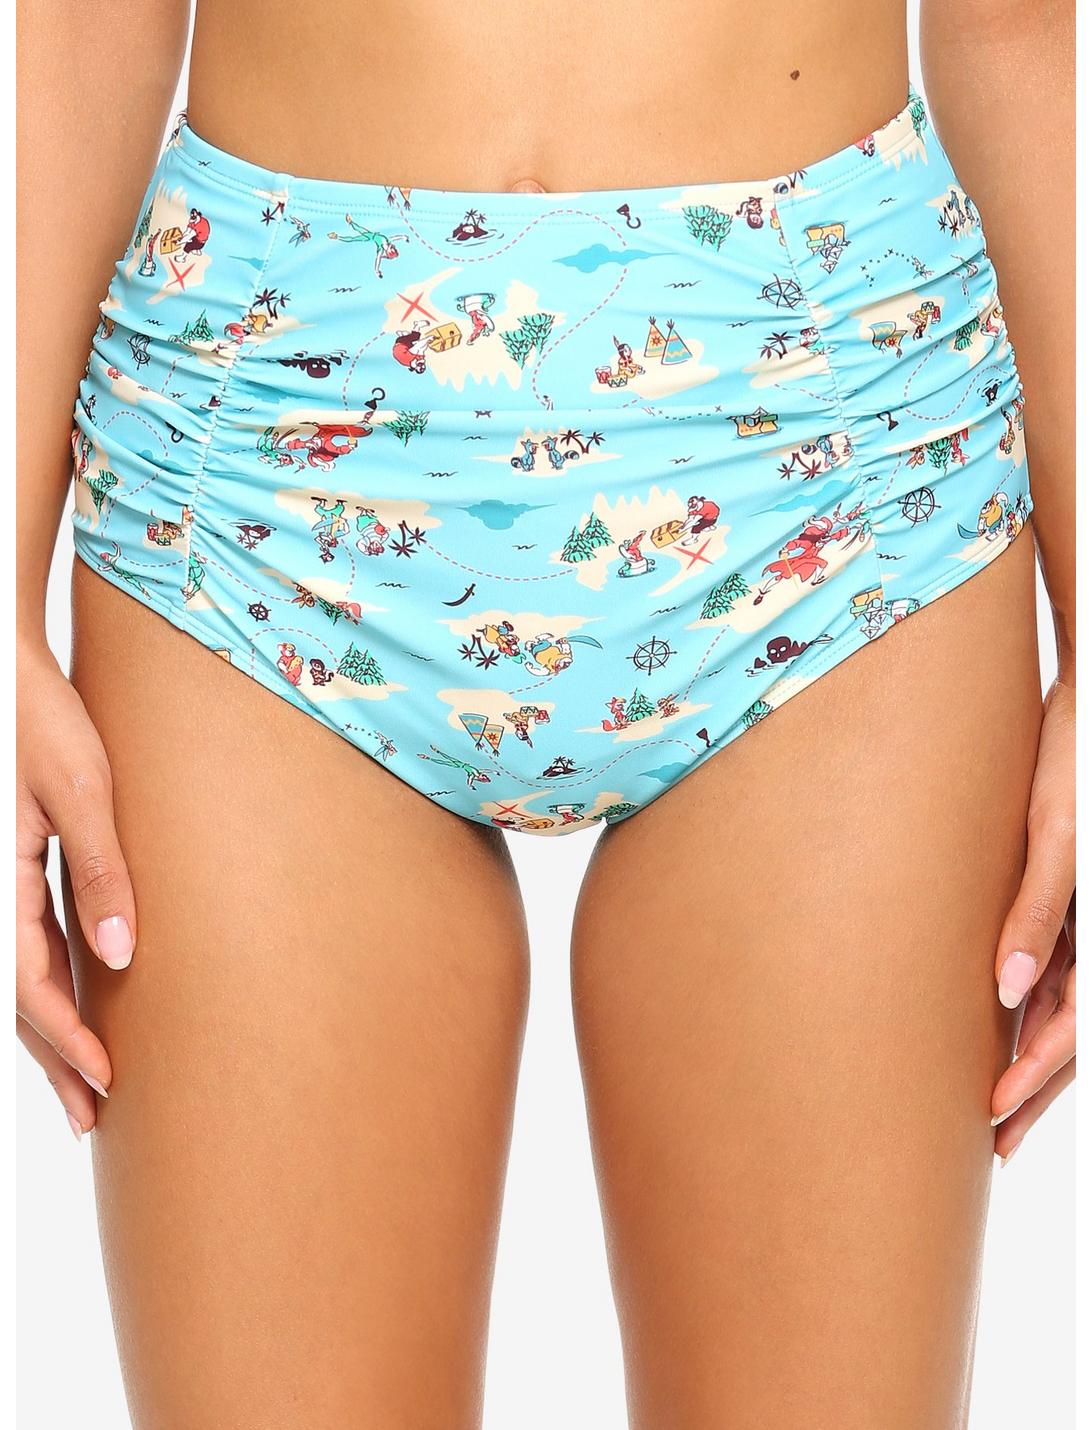 Disney Peter Pan Never Land Map High Waisted Ruched Swim Bottoms, MULTI, hi-res